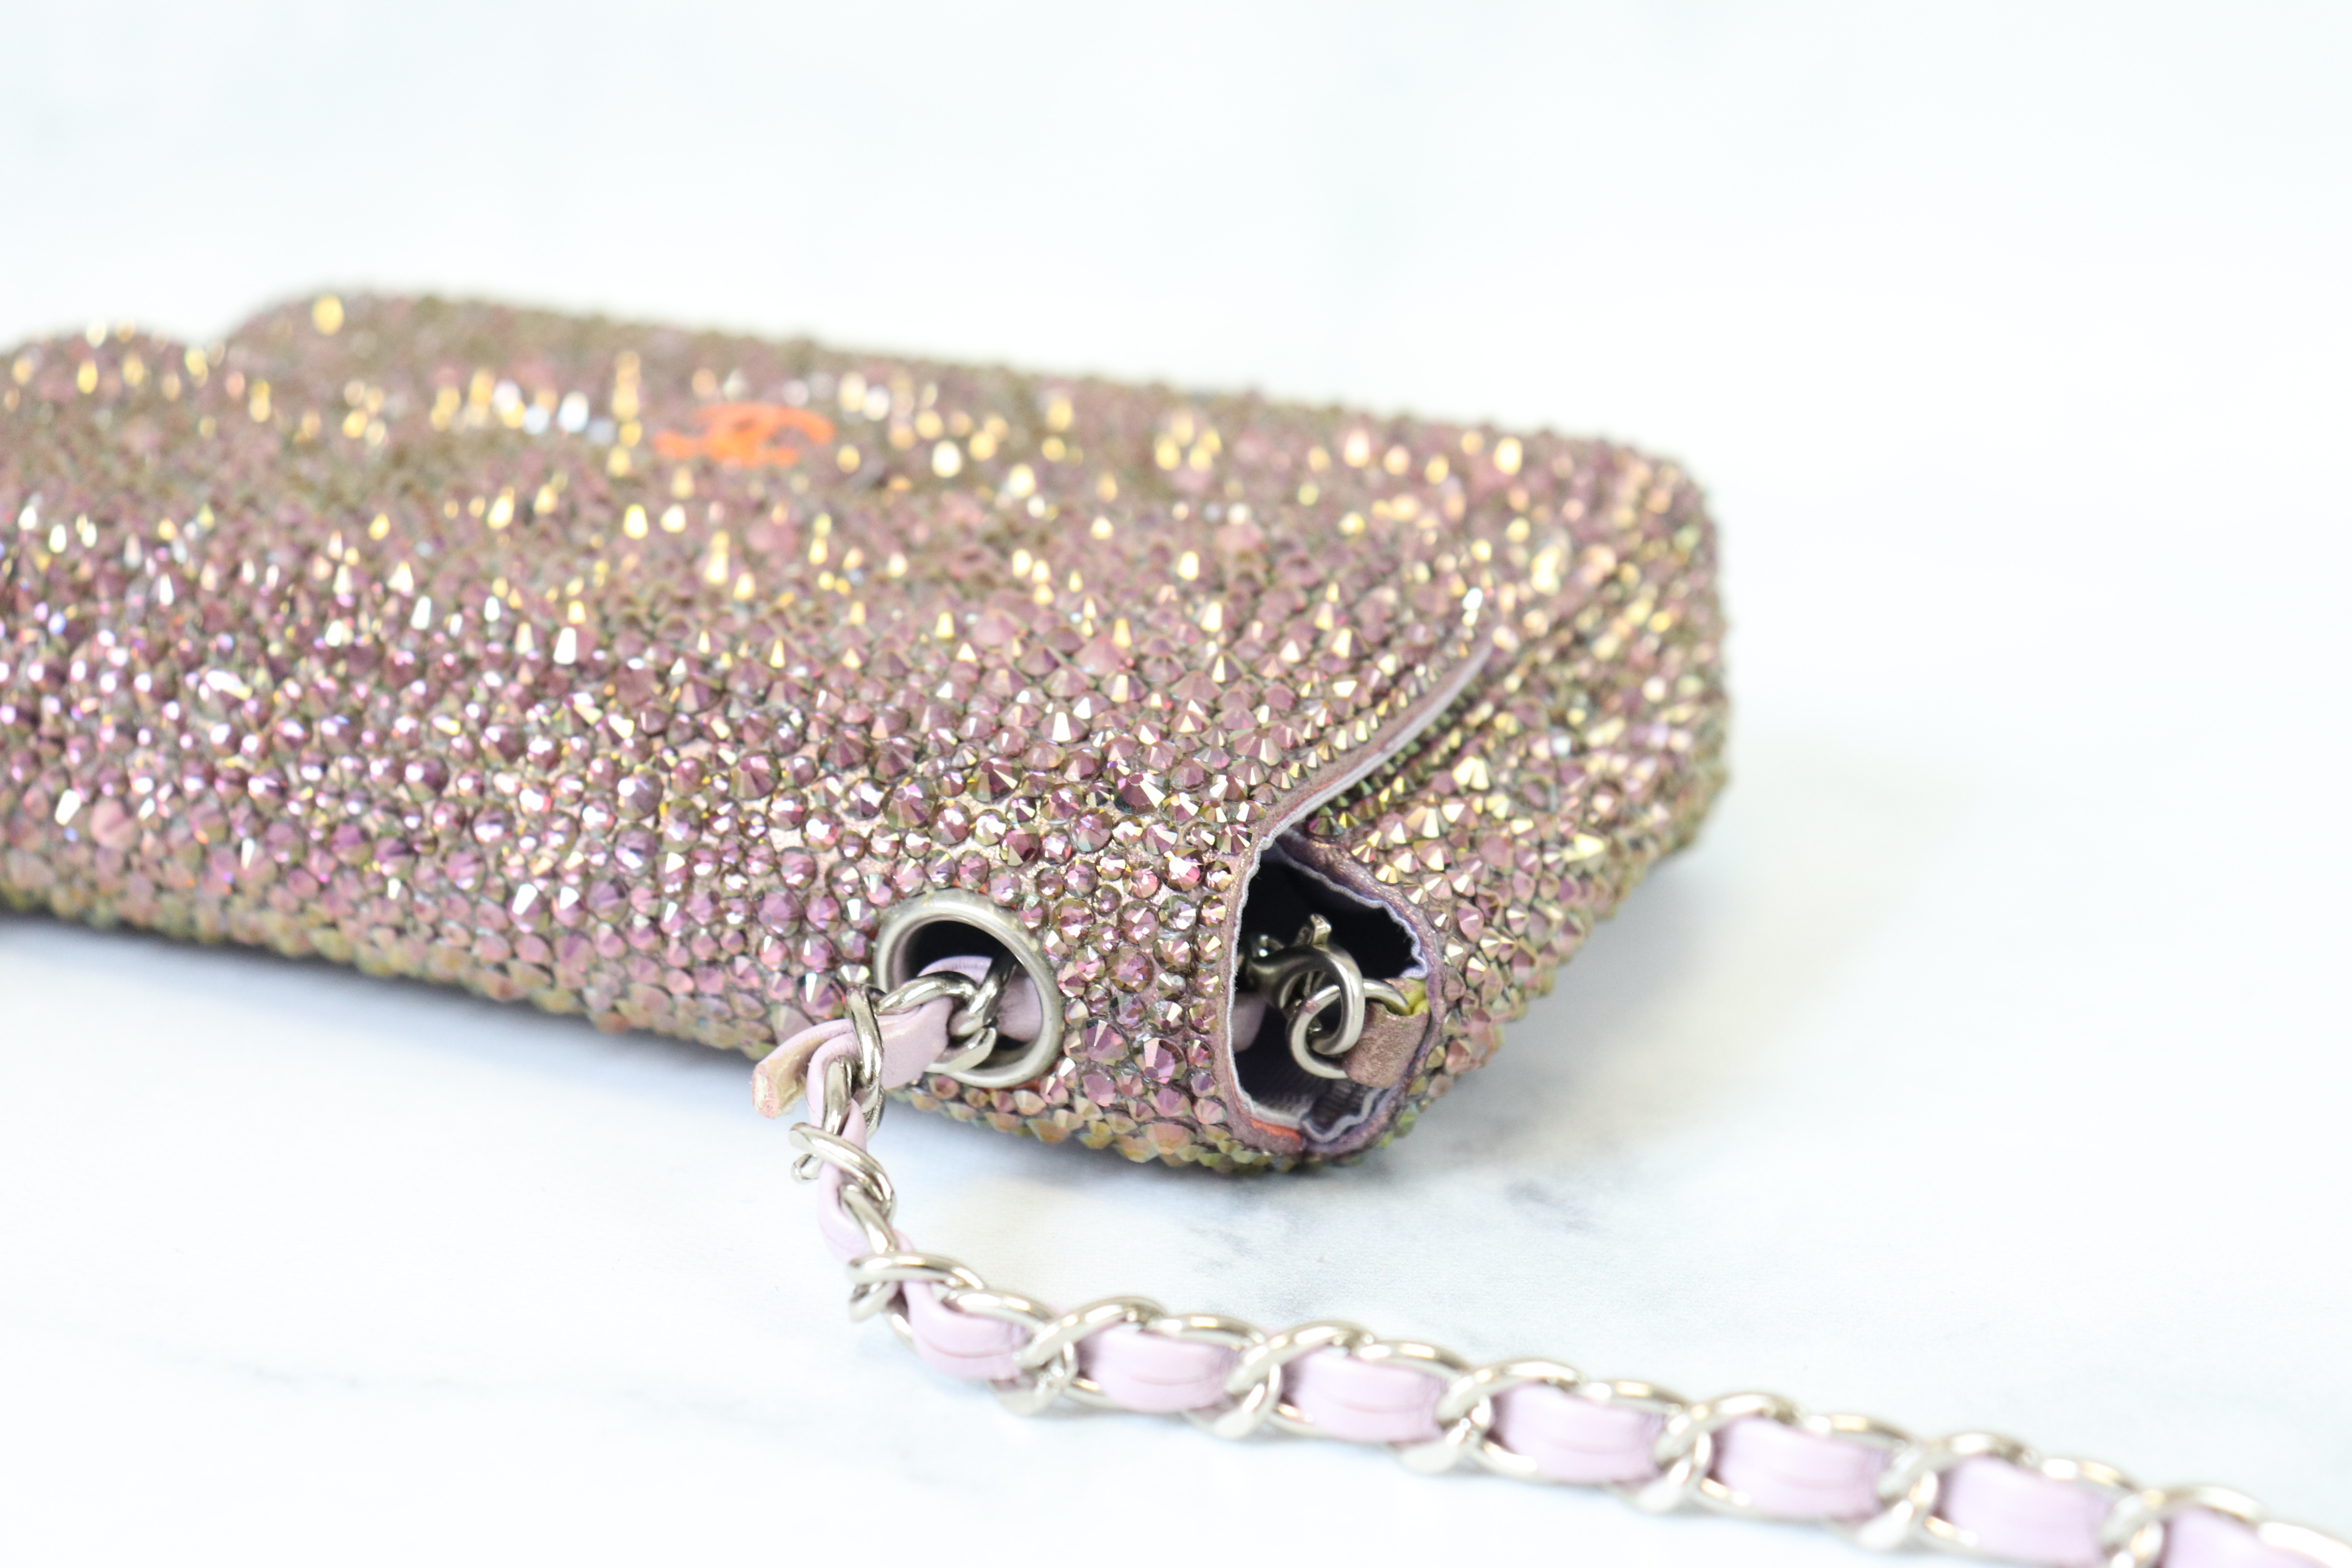 Chanel Crystal Mini Flap Bag Pink Lilac, Pre Owned in Dustbag - Julia Rose  Boston